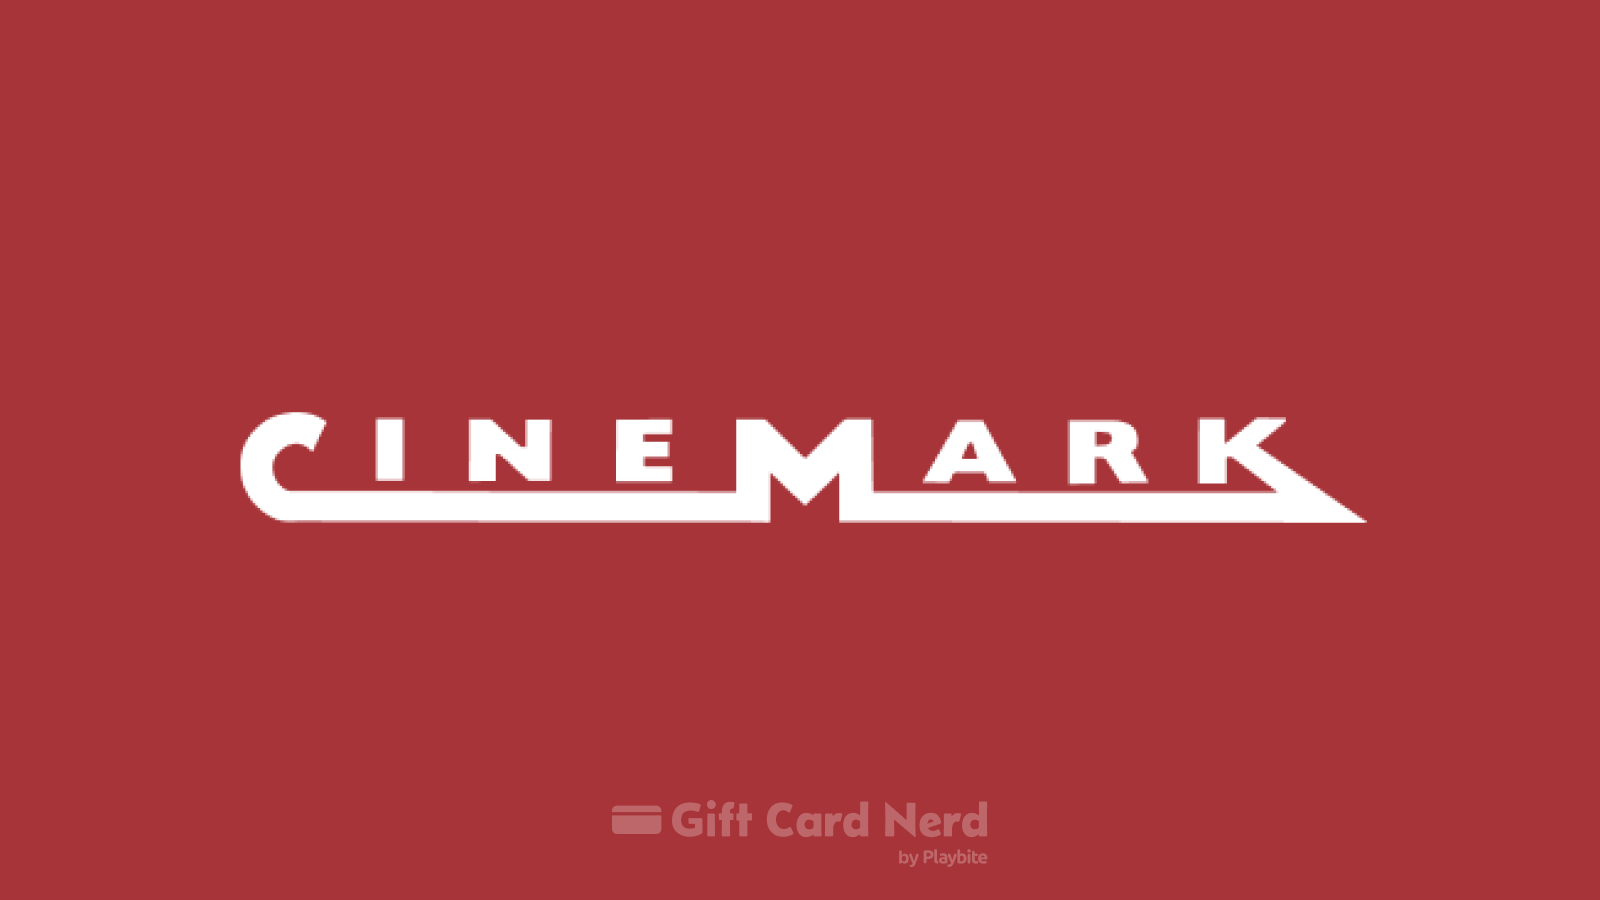 Can You Use a Cinemark Gift Card on Amazon?